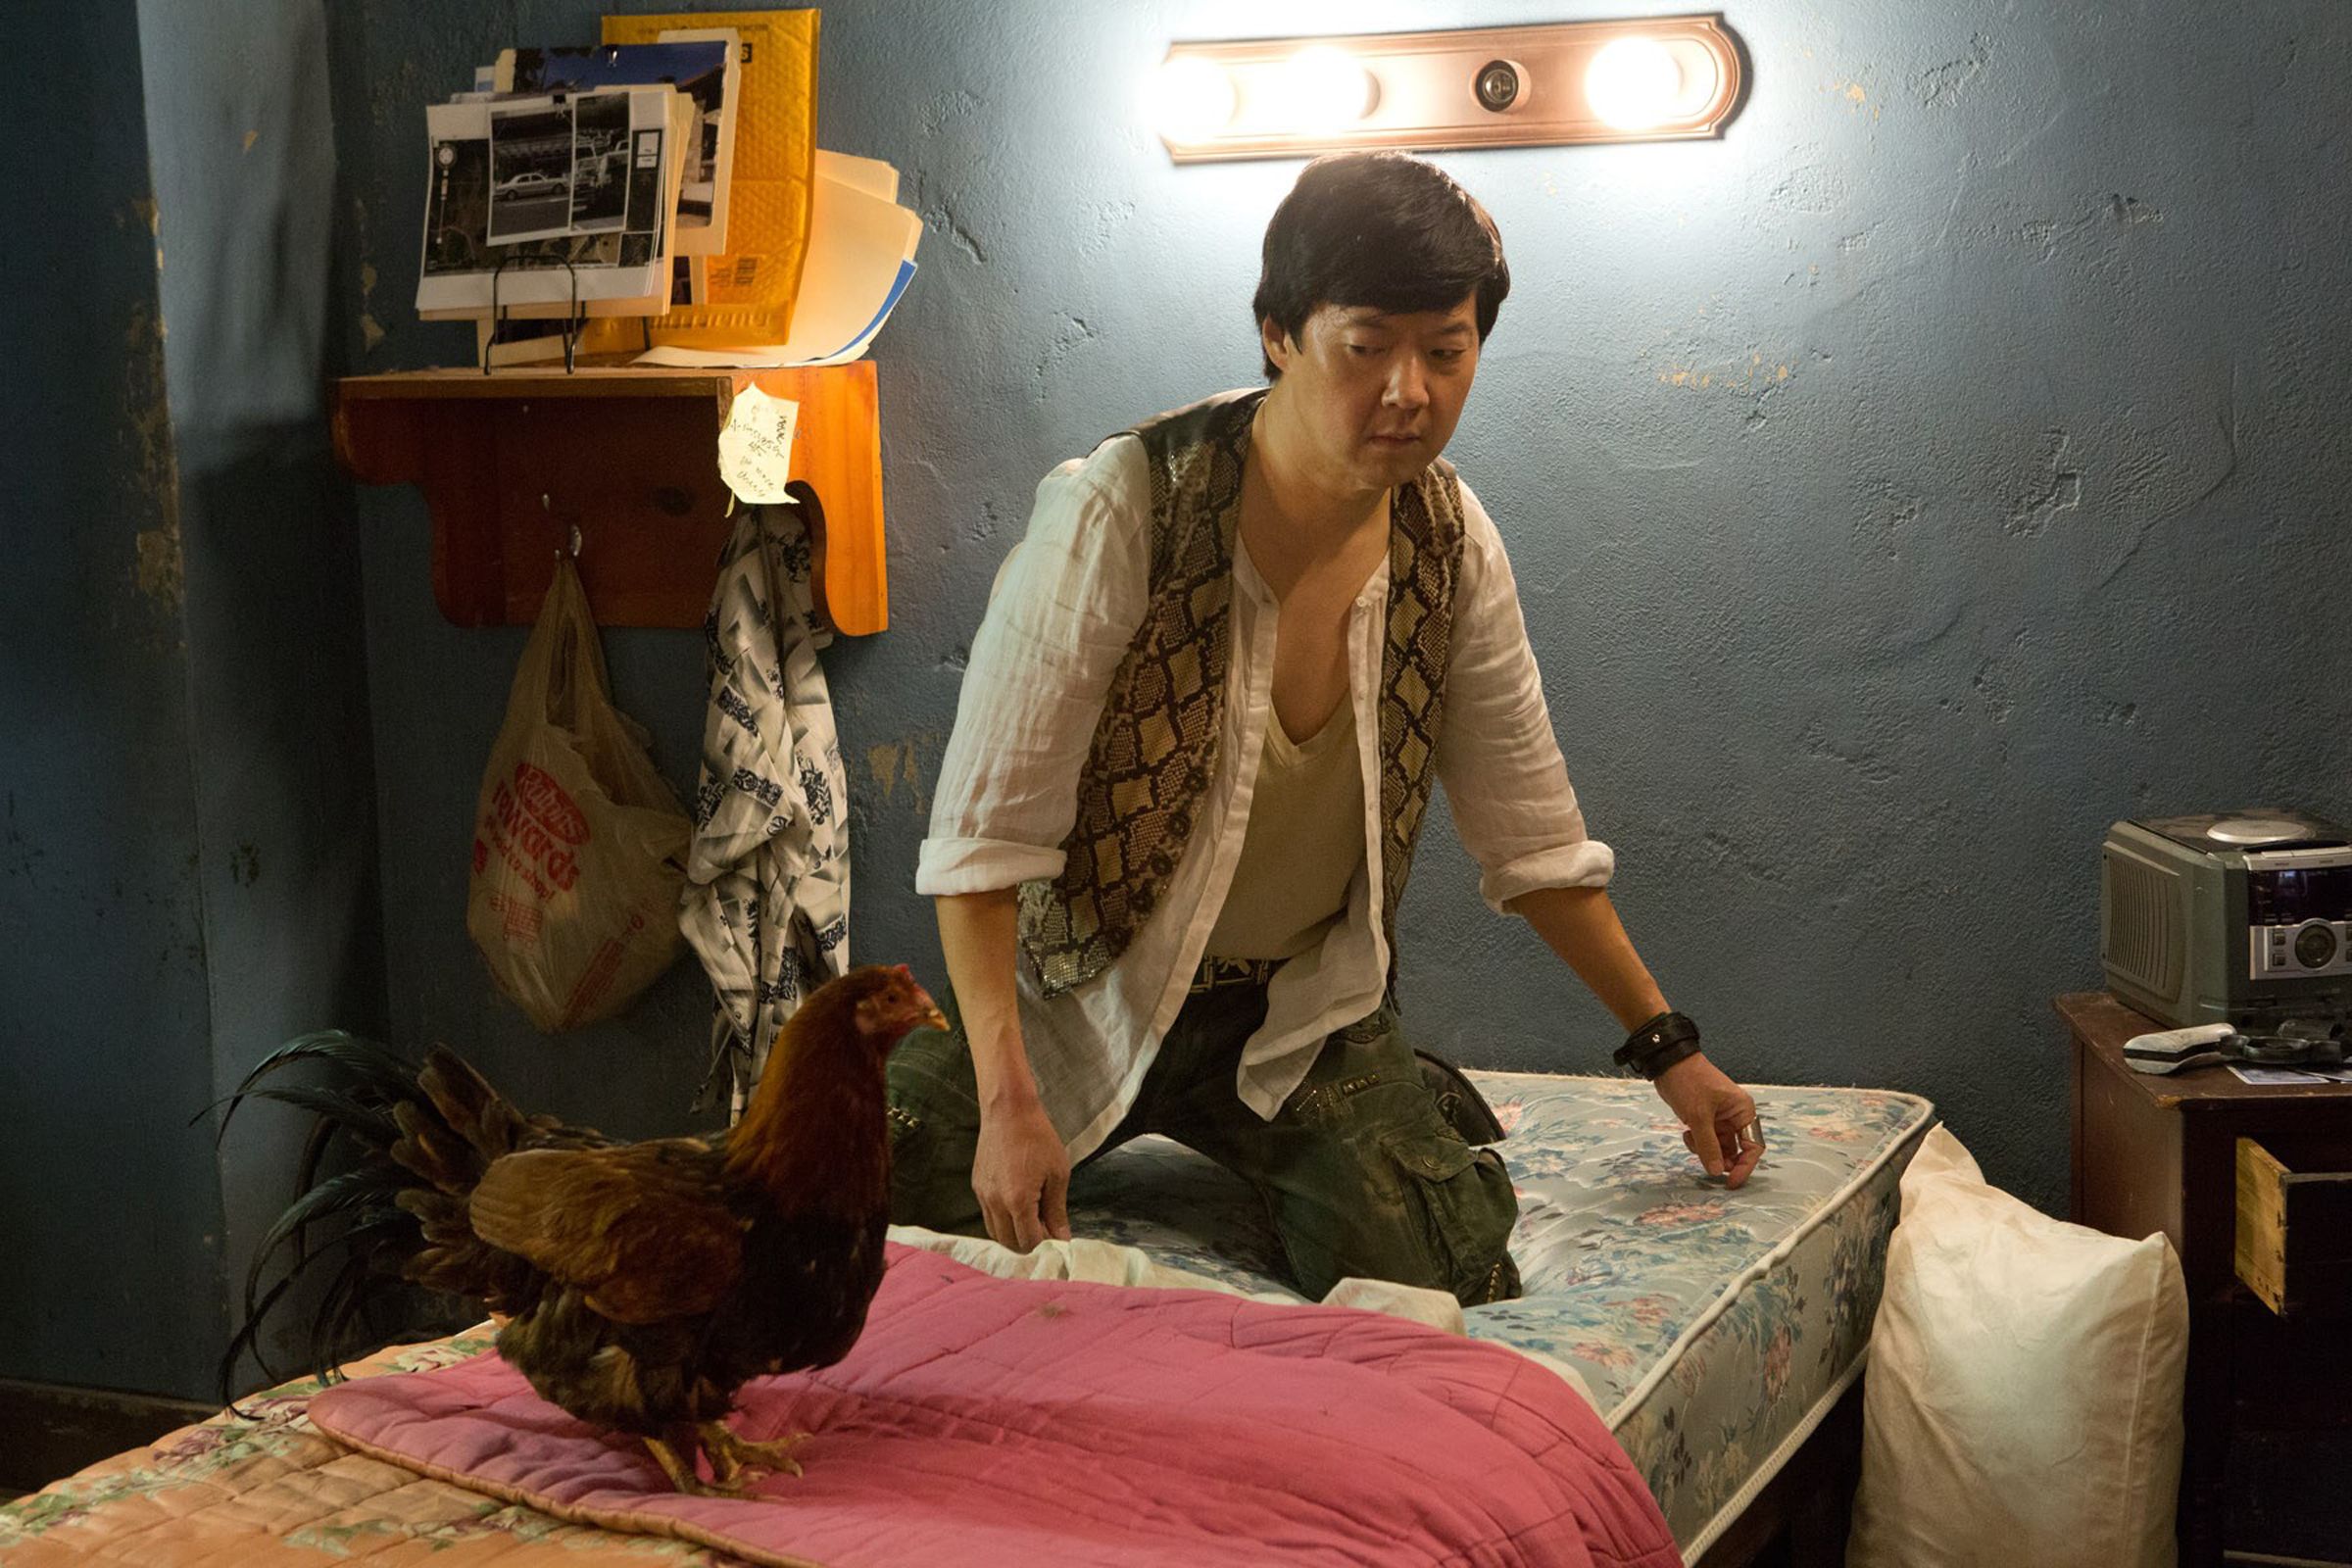 Ken Jeong's Mr. Chow gives dirty looks to a rooster in a scene from The Hangover Part IIIChow has most definitely evolved throughout the films, from being the crazy naked guy who Lops out of the trunk in {29}, to being Alan's plus-one at the wedding in {30}. The actor revealed that Chow is fully fleshed-out in this finale.